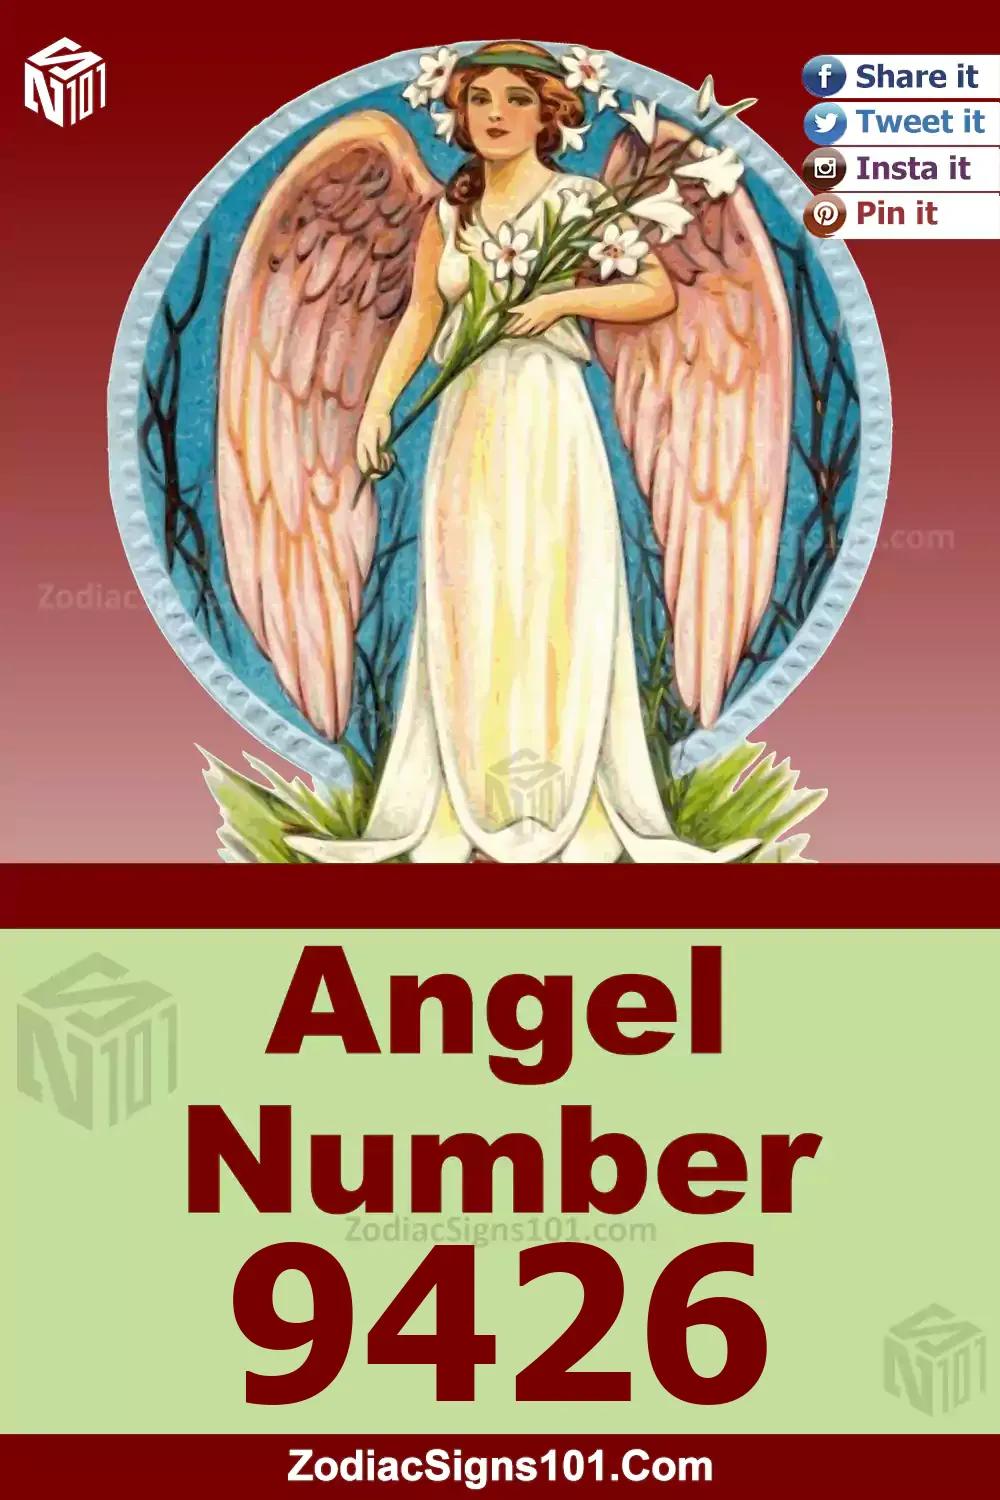 9426 Angel Number Meaning